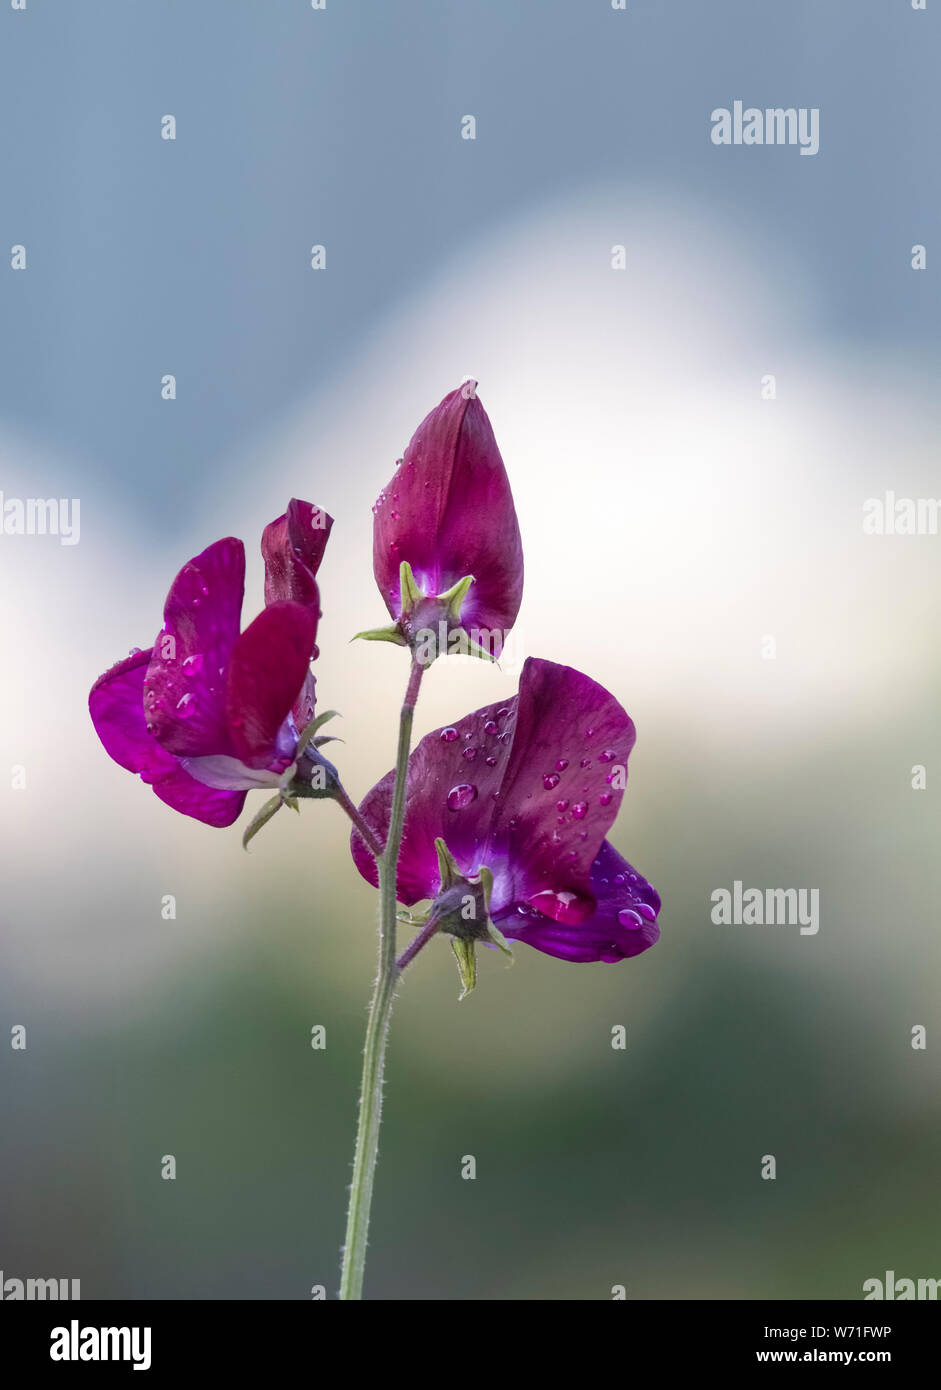 Plum coloured Sweet Pea flowers against an out of focus background Stock Photo